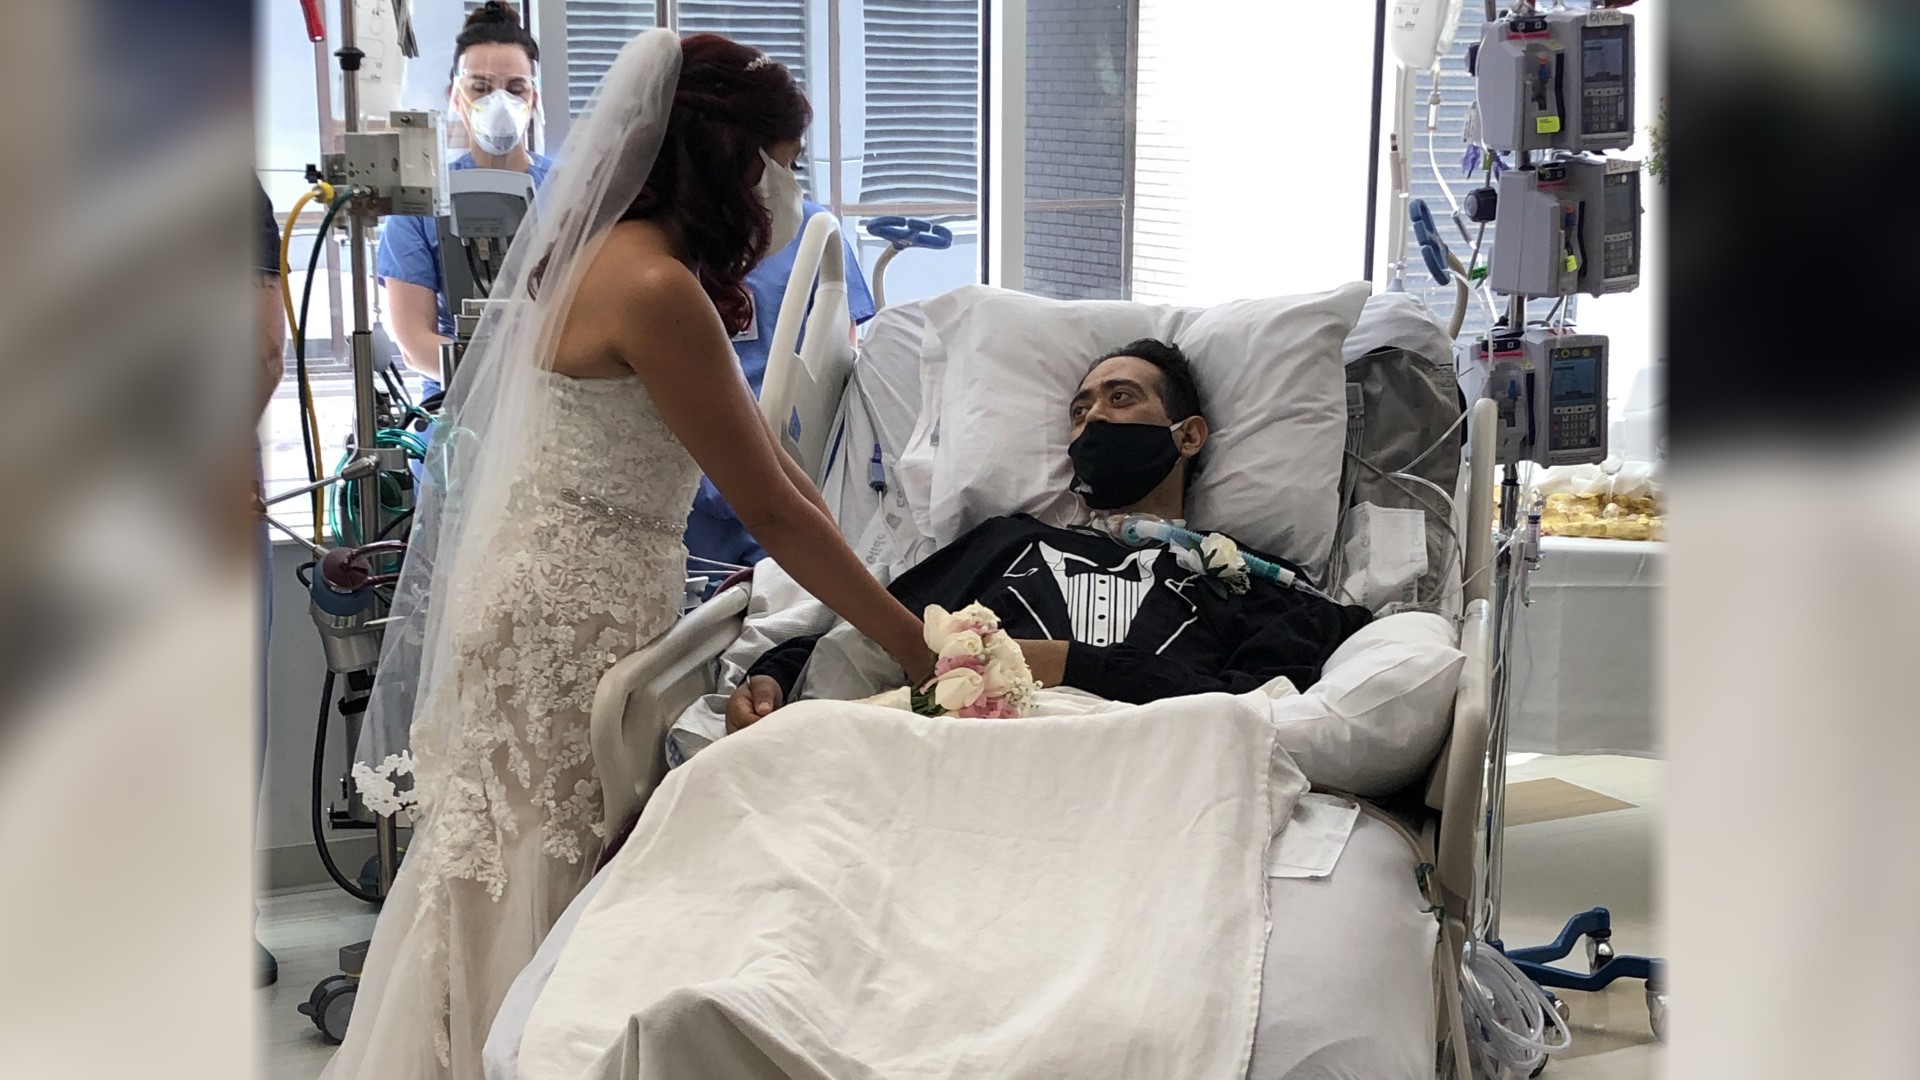 Carlos and Grace, were supposed to say ‘I do’.  But then he was diagnosed with COVID the week of their wedding date. Digital reporter Lexi Hazlett has the love story